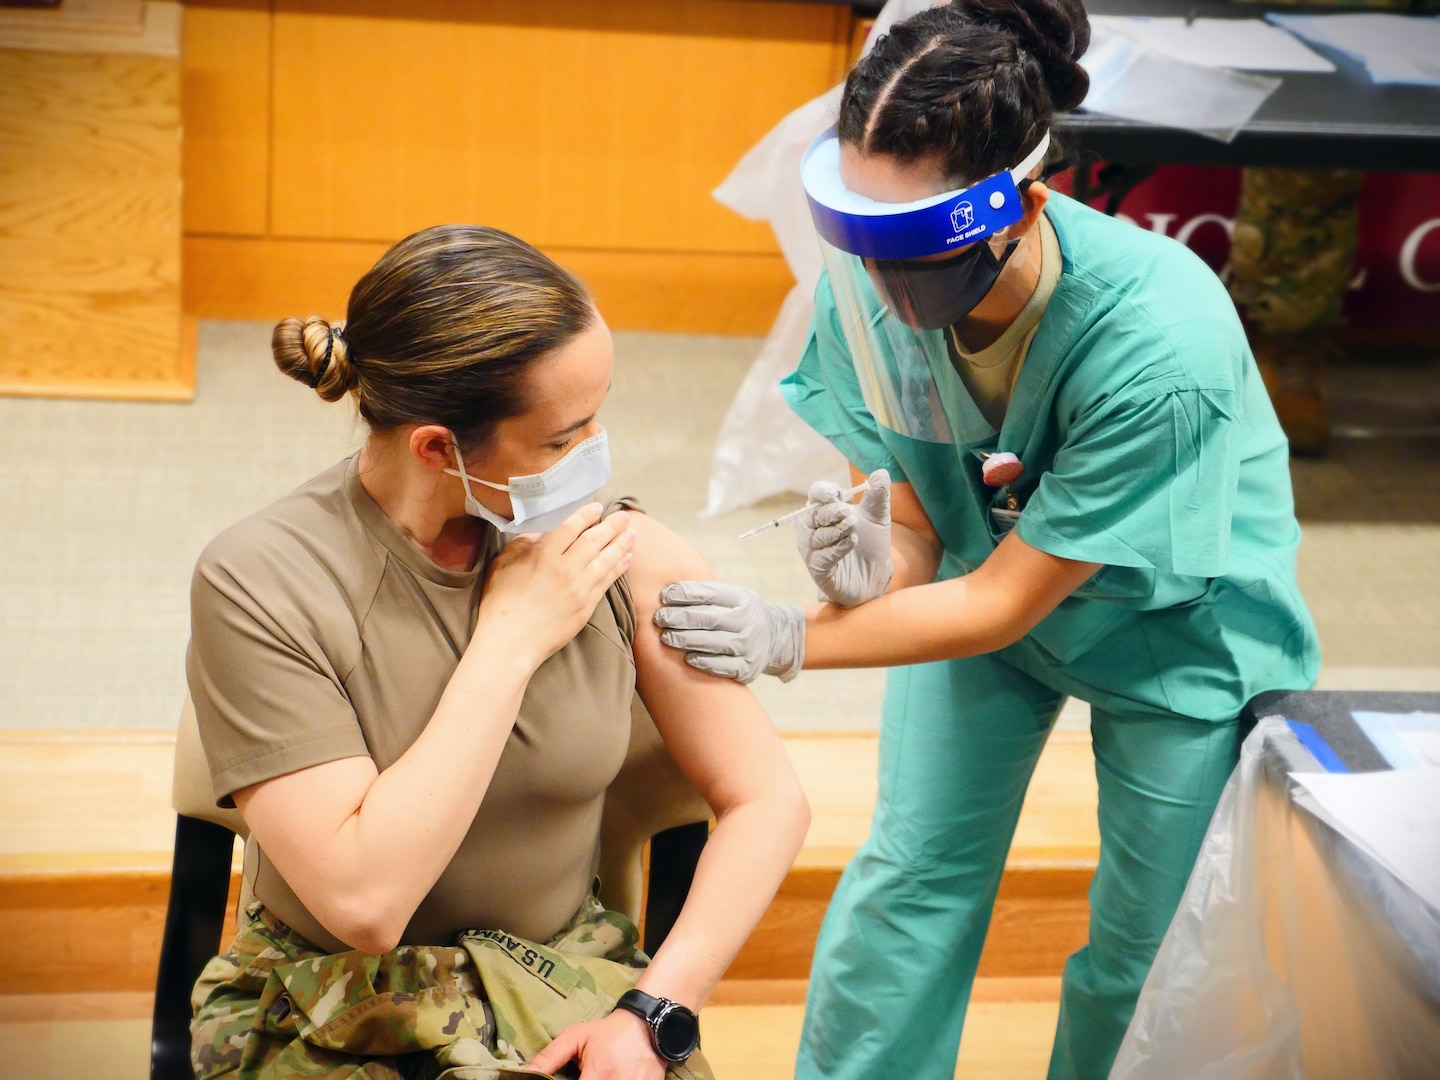 Senior Airman Marisol Salgado, medical technician, administers a Pfizer-BioNTech COVID-19 vaccine to Army Capt. Rebecca Parrish, a COVID-19 intensive care unit nurse at Brooke Army Medical Center on Joint Base San Antonio-Fort Sam Houston, Dec. 17, 2020. Parrish was the first BAMC staff member to receive a COVID-19 vaccine.